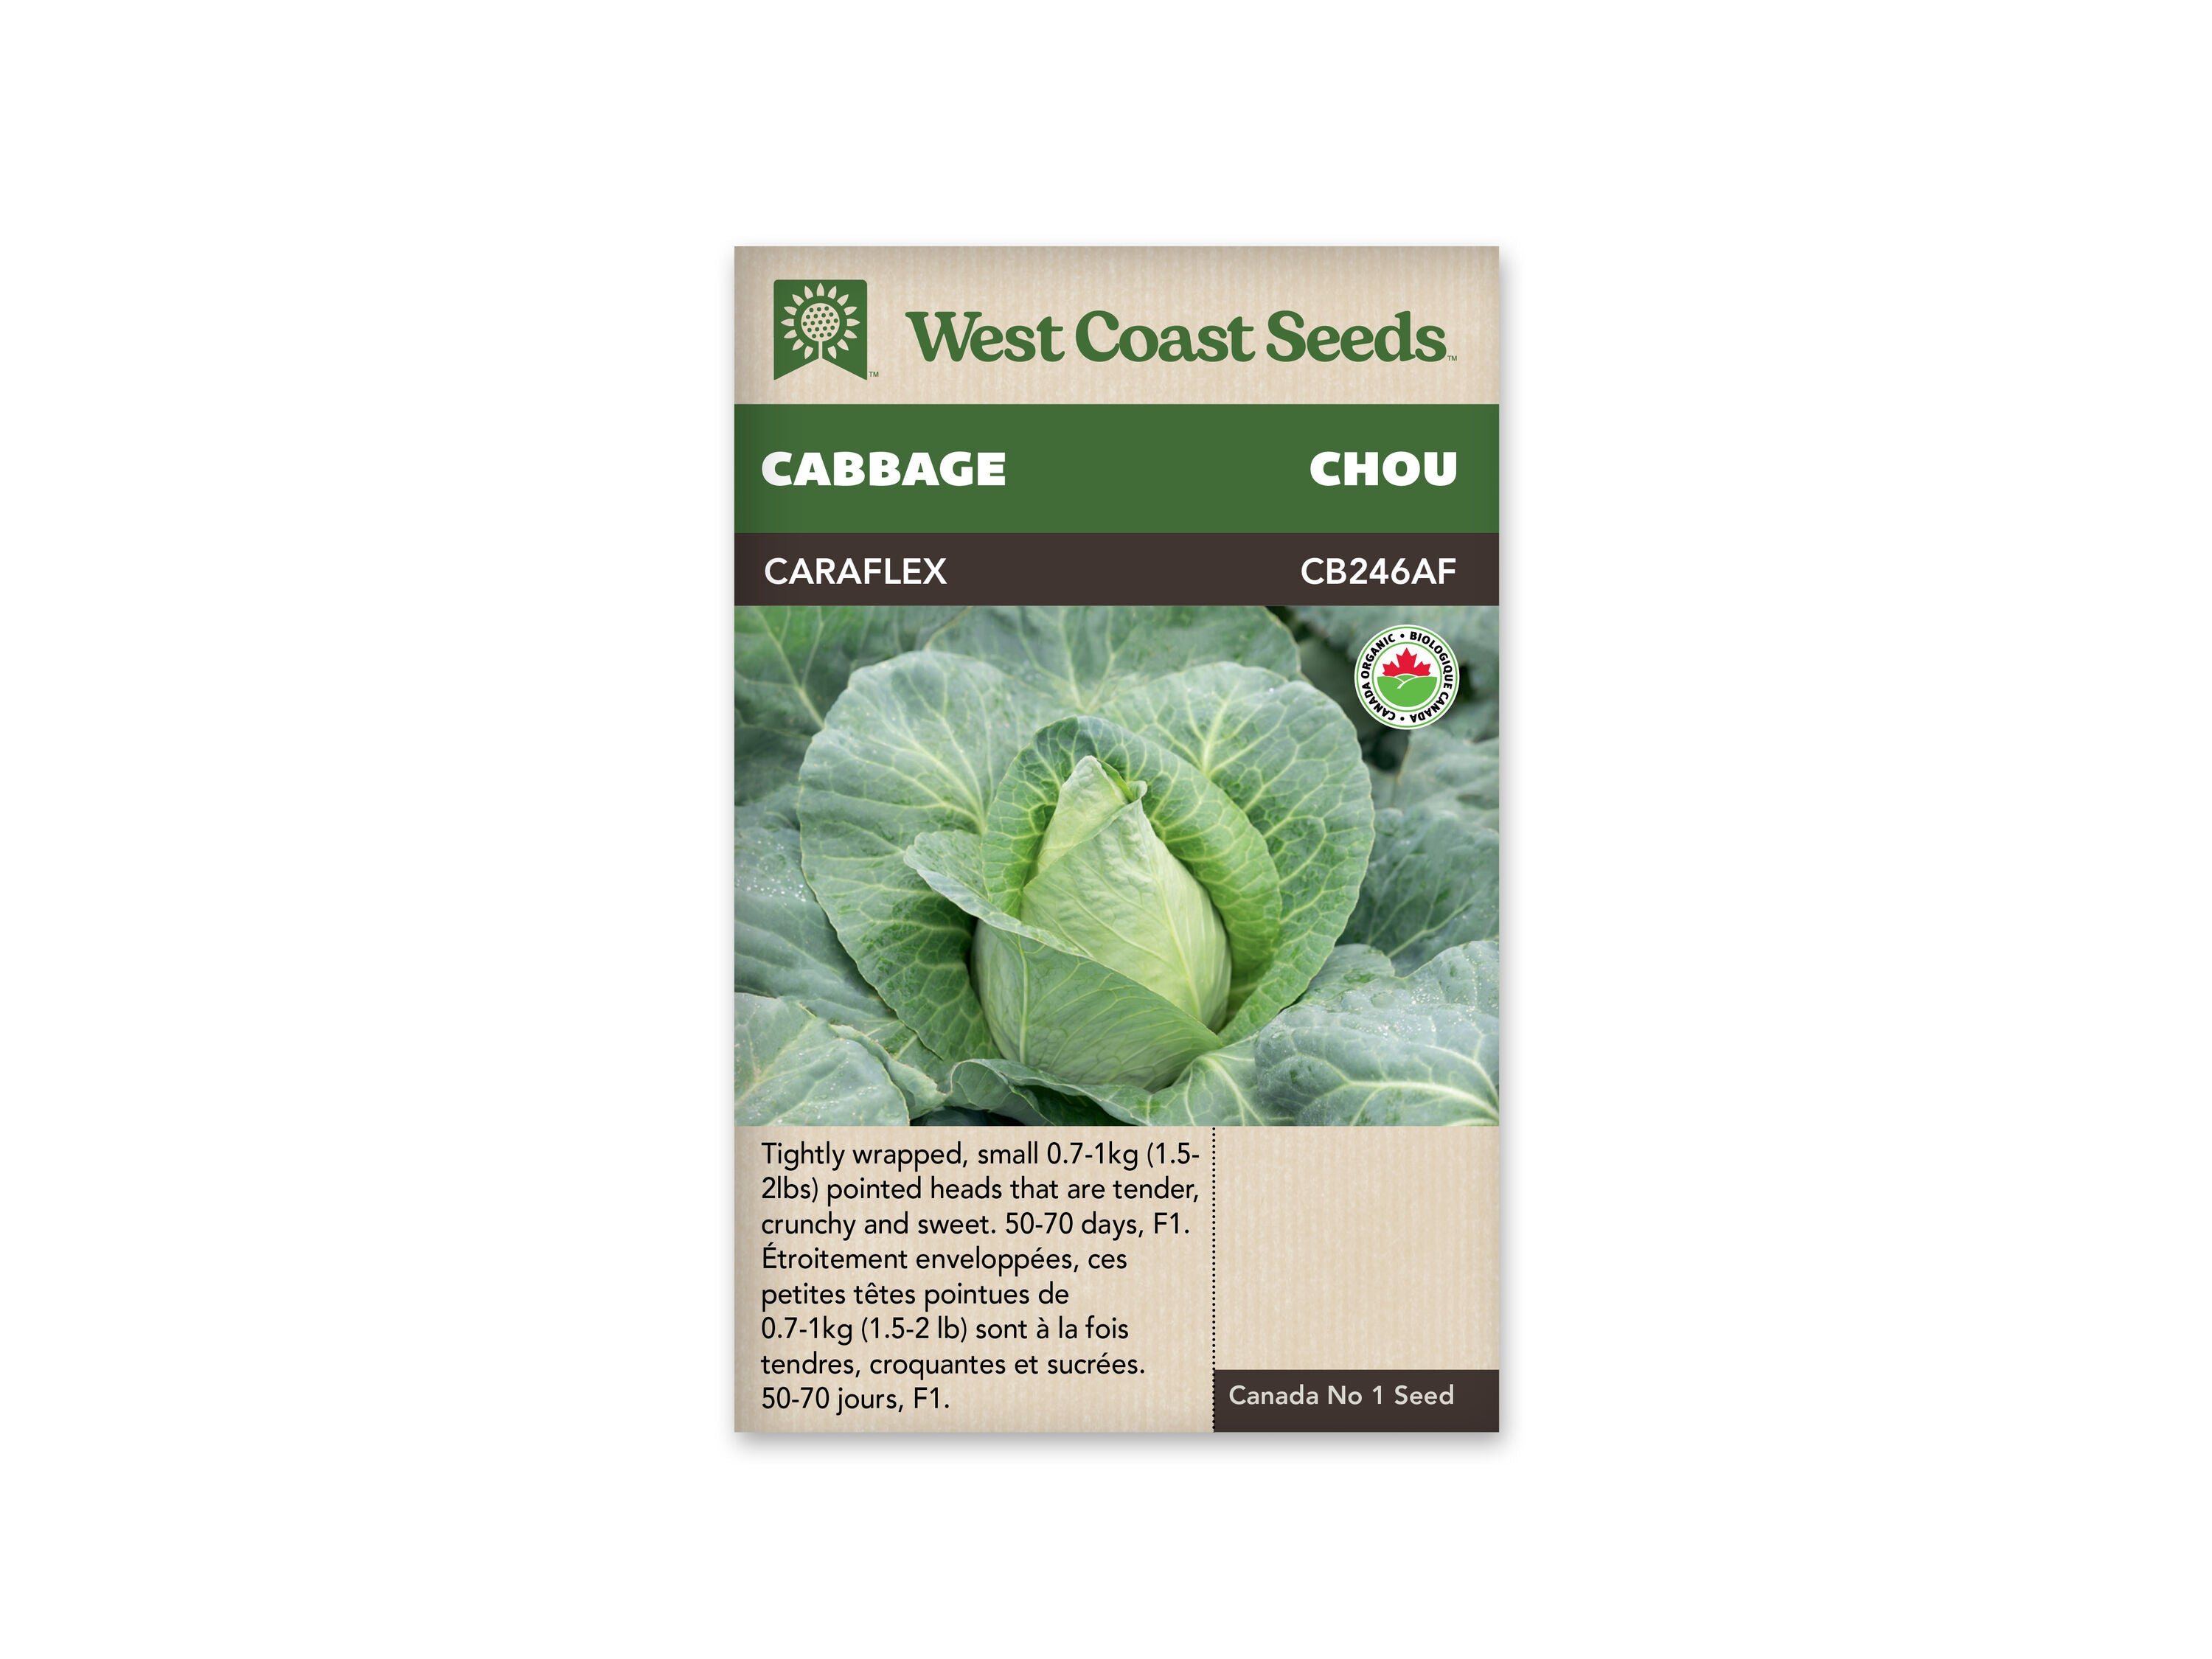 Caraflex F1 (Coated) Certified Organic Cabbage Seeds